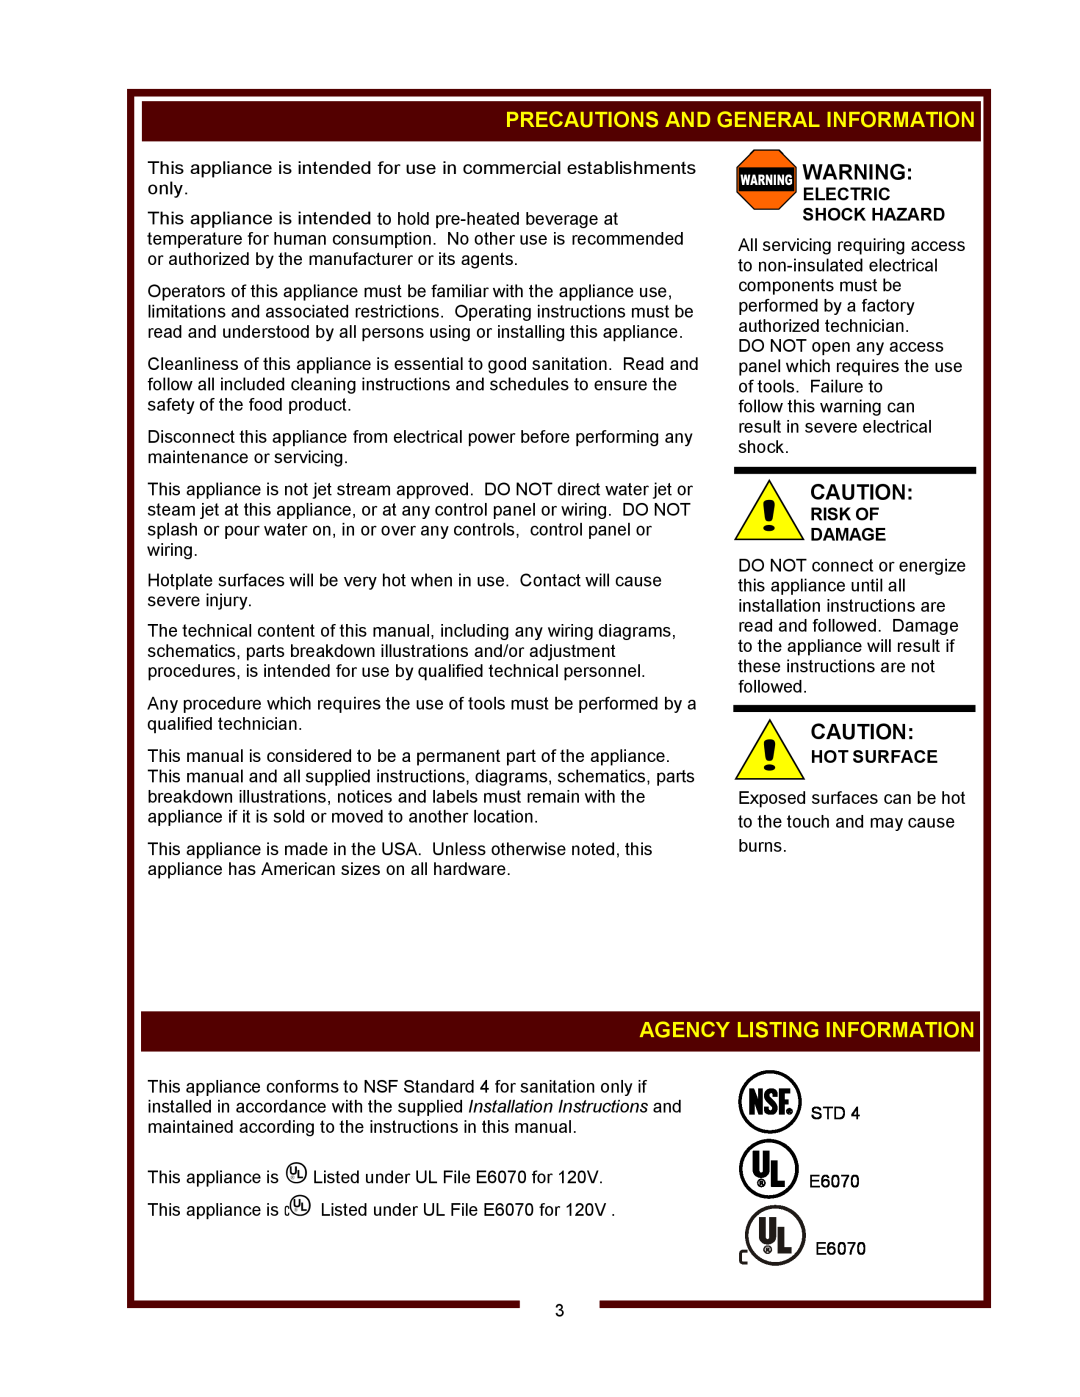 Wells H-006UL Precautions And General Information, Agency Listing Information, Electric Shock Hazard, Risk Of Damage 